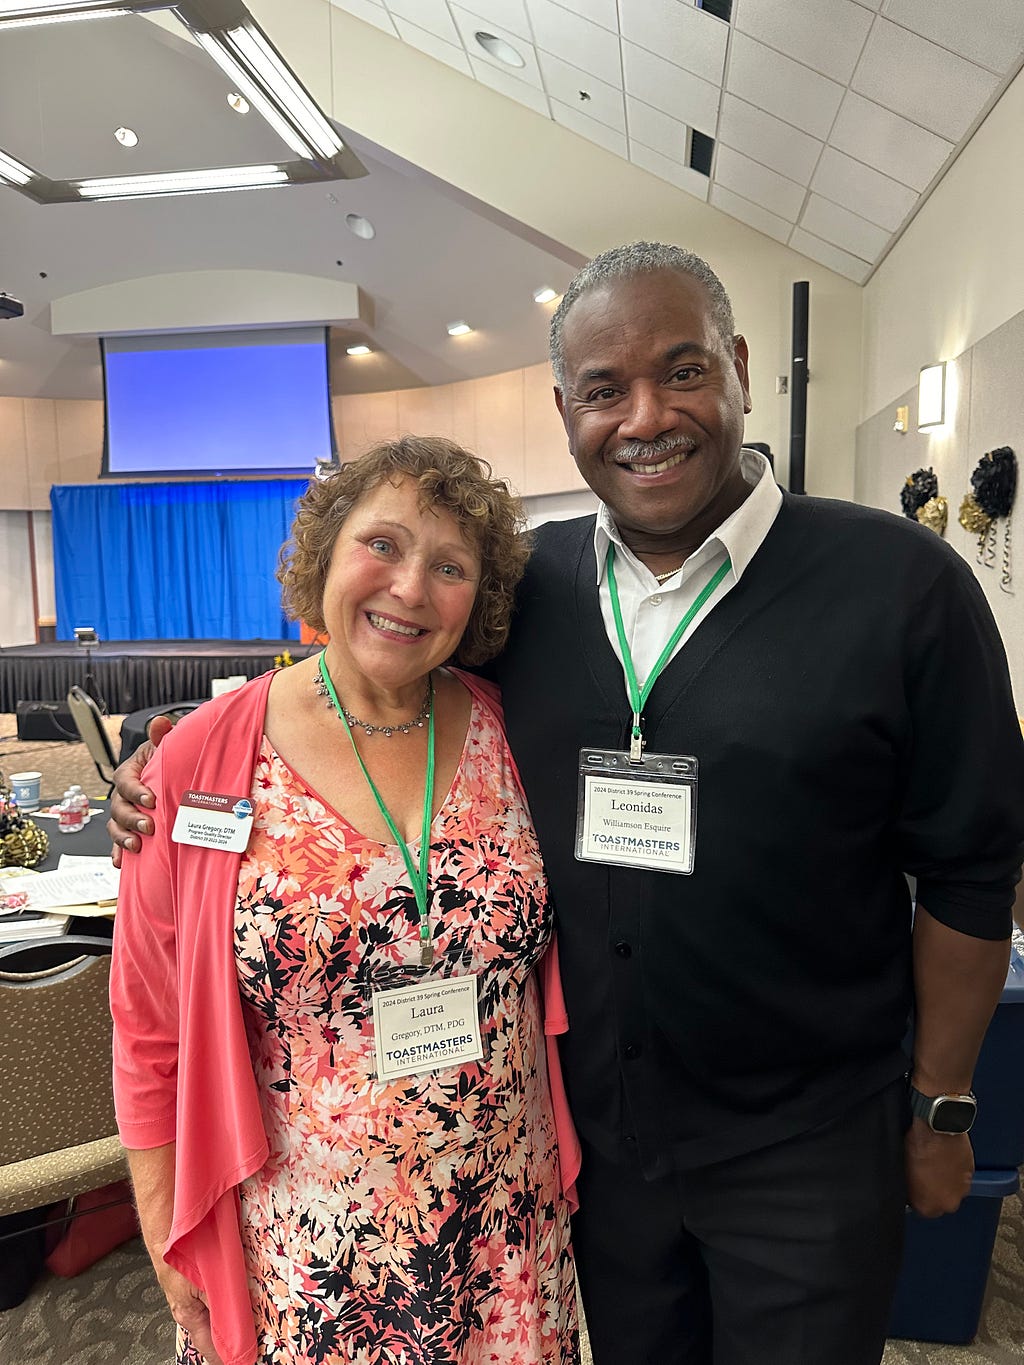 Caption: Laura Gregory, DTM, Incoming District Director for District 39, alongside Leonidas Esquire Williamson, VP of Public Relations for River City Toastmasters Club #7997.